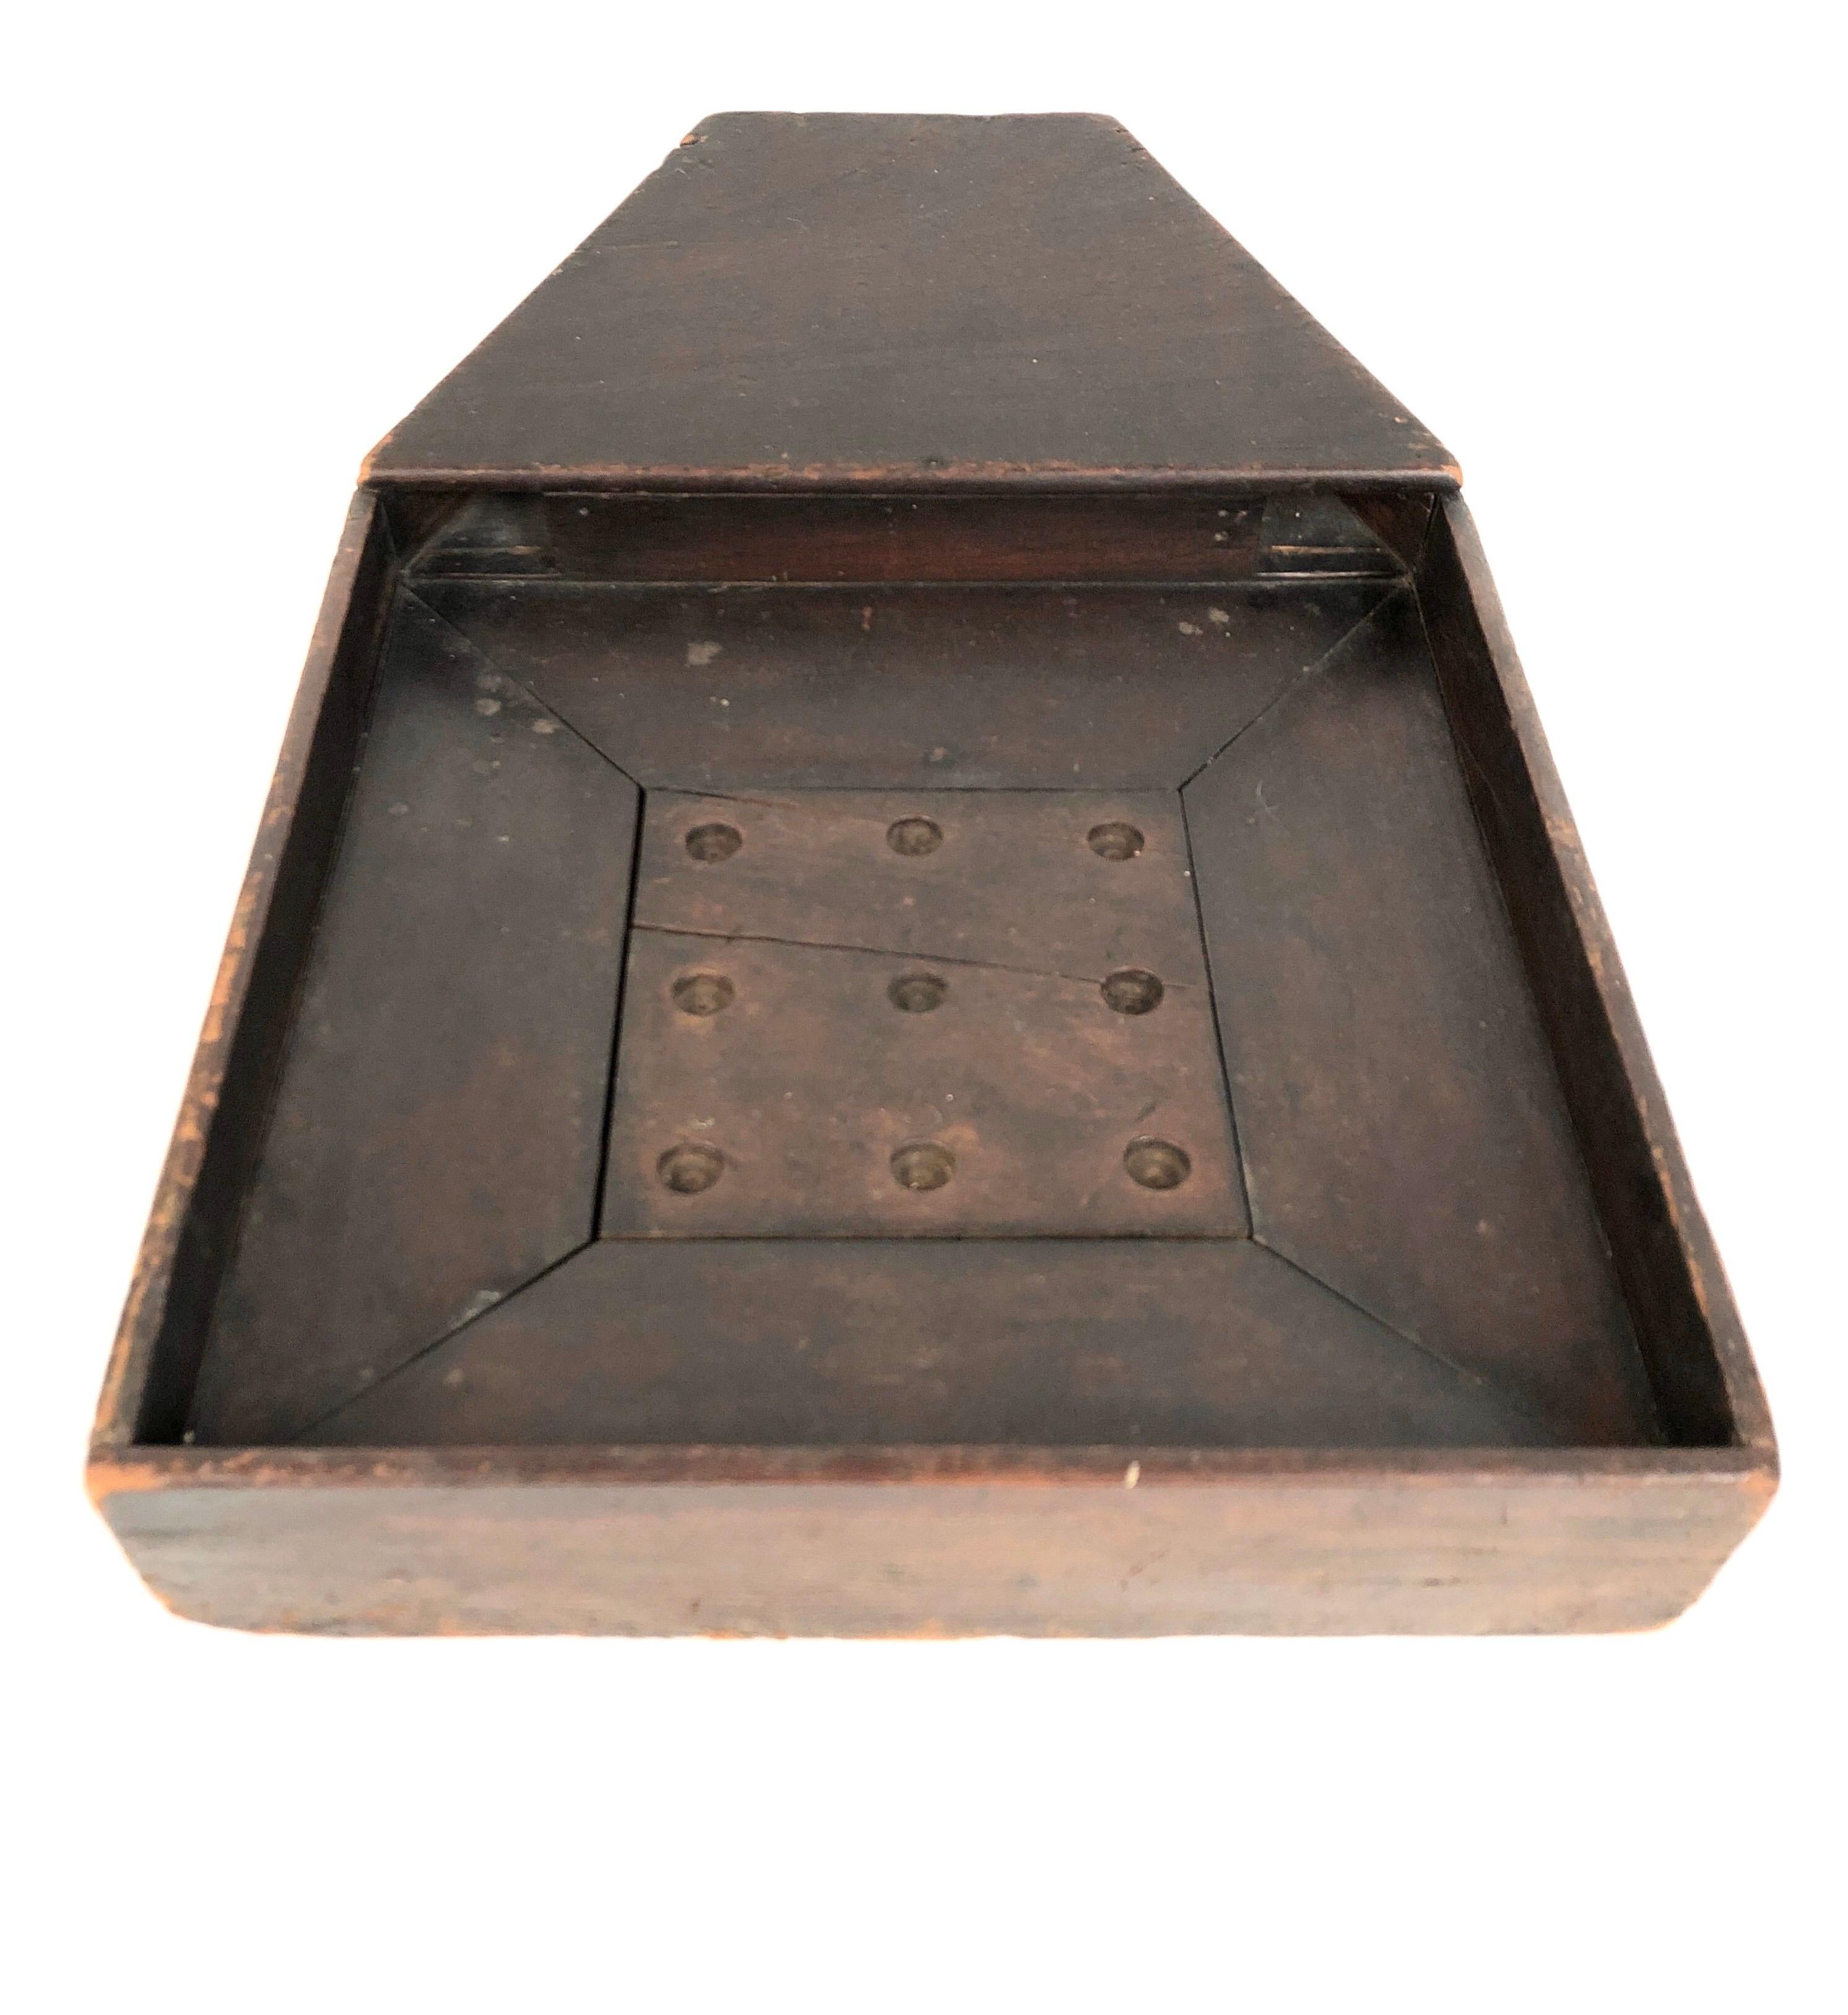 A rare and unusual American 19th century wooden Folk Art game similar to roulette in that a marble is dropped in one of two elevated lots in the back, rolls down either chute and circles the board before dropping into one of 9 carved holes with